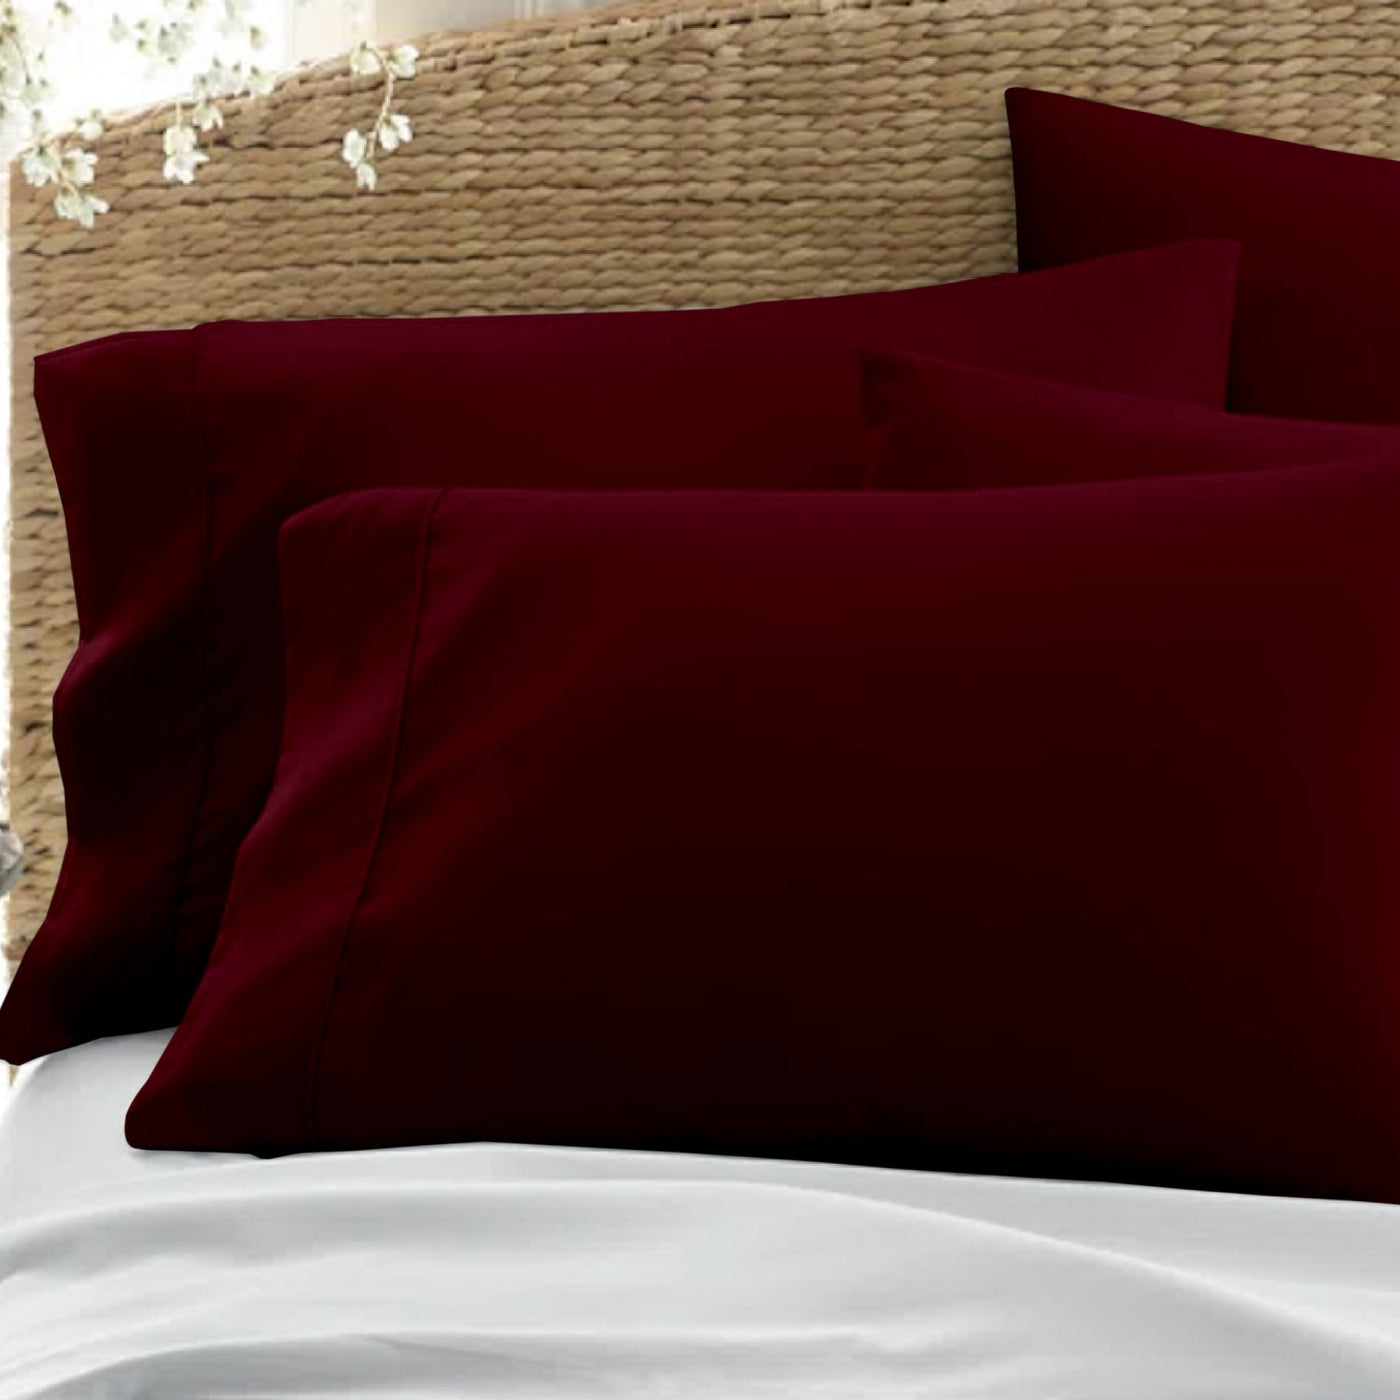 Set of 2 Solid Pillowcases 100% Egyptian Cotton 800 Thread Count